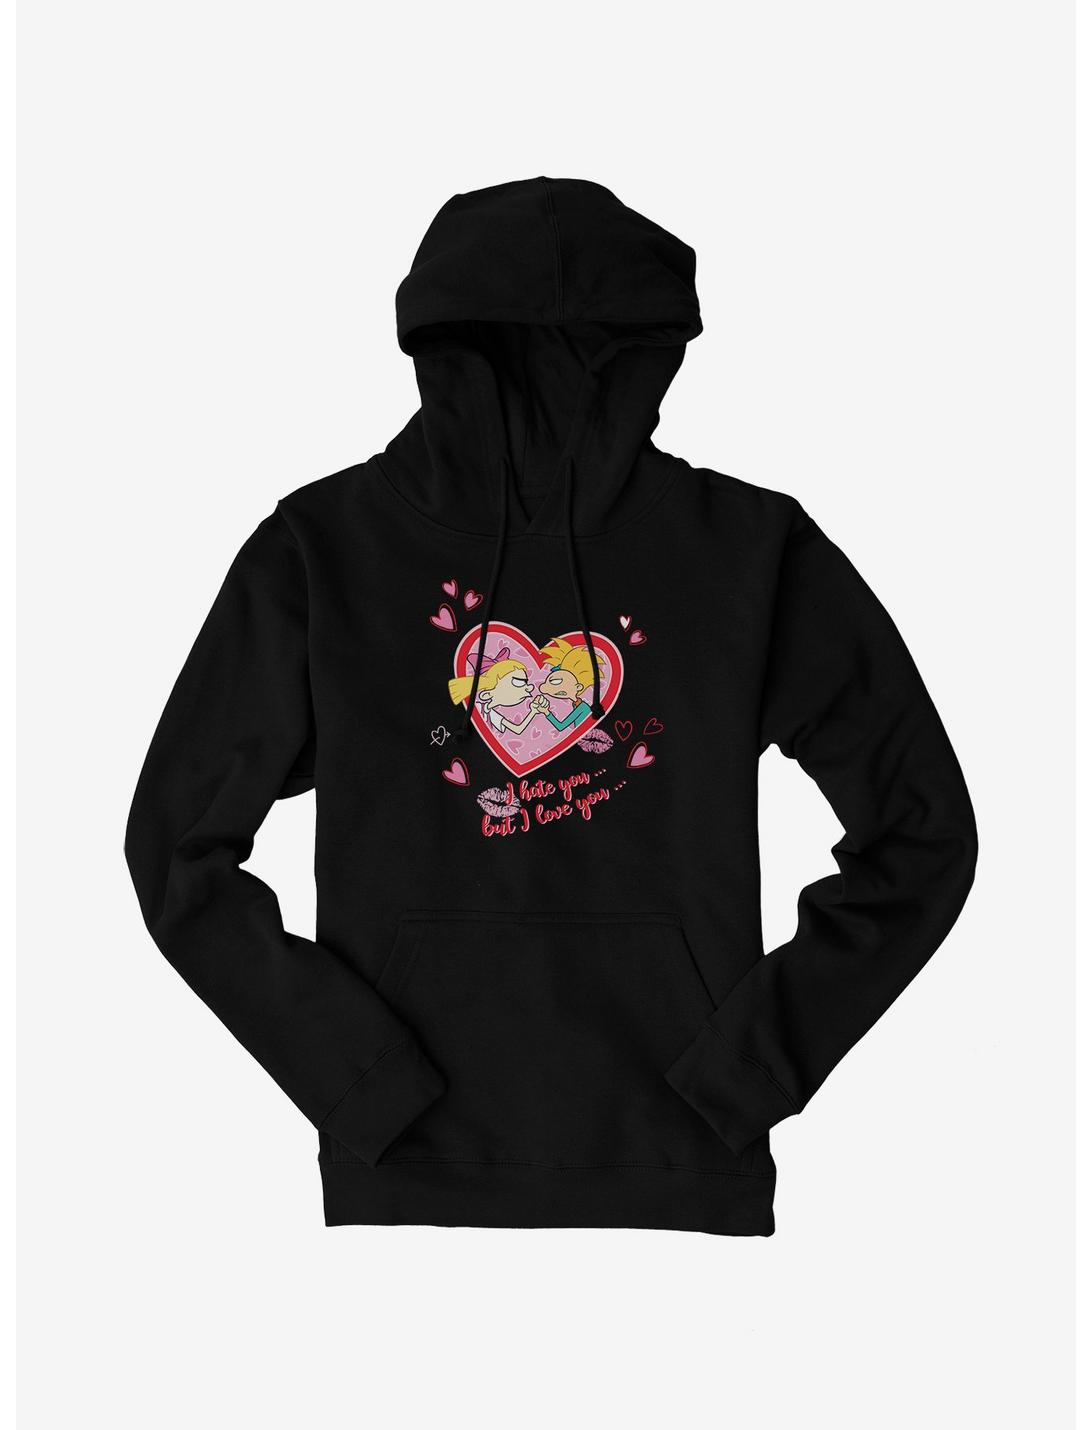 Hey Arnold! I Hate You? But I Love You? Hoodie, BLACK, hi-res